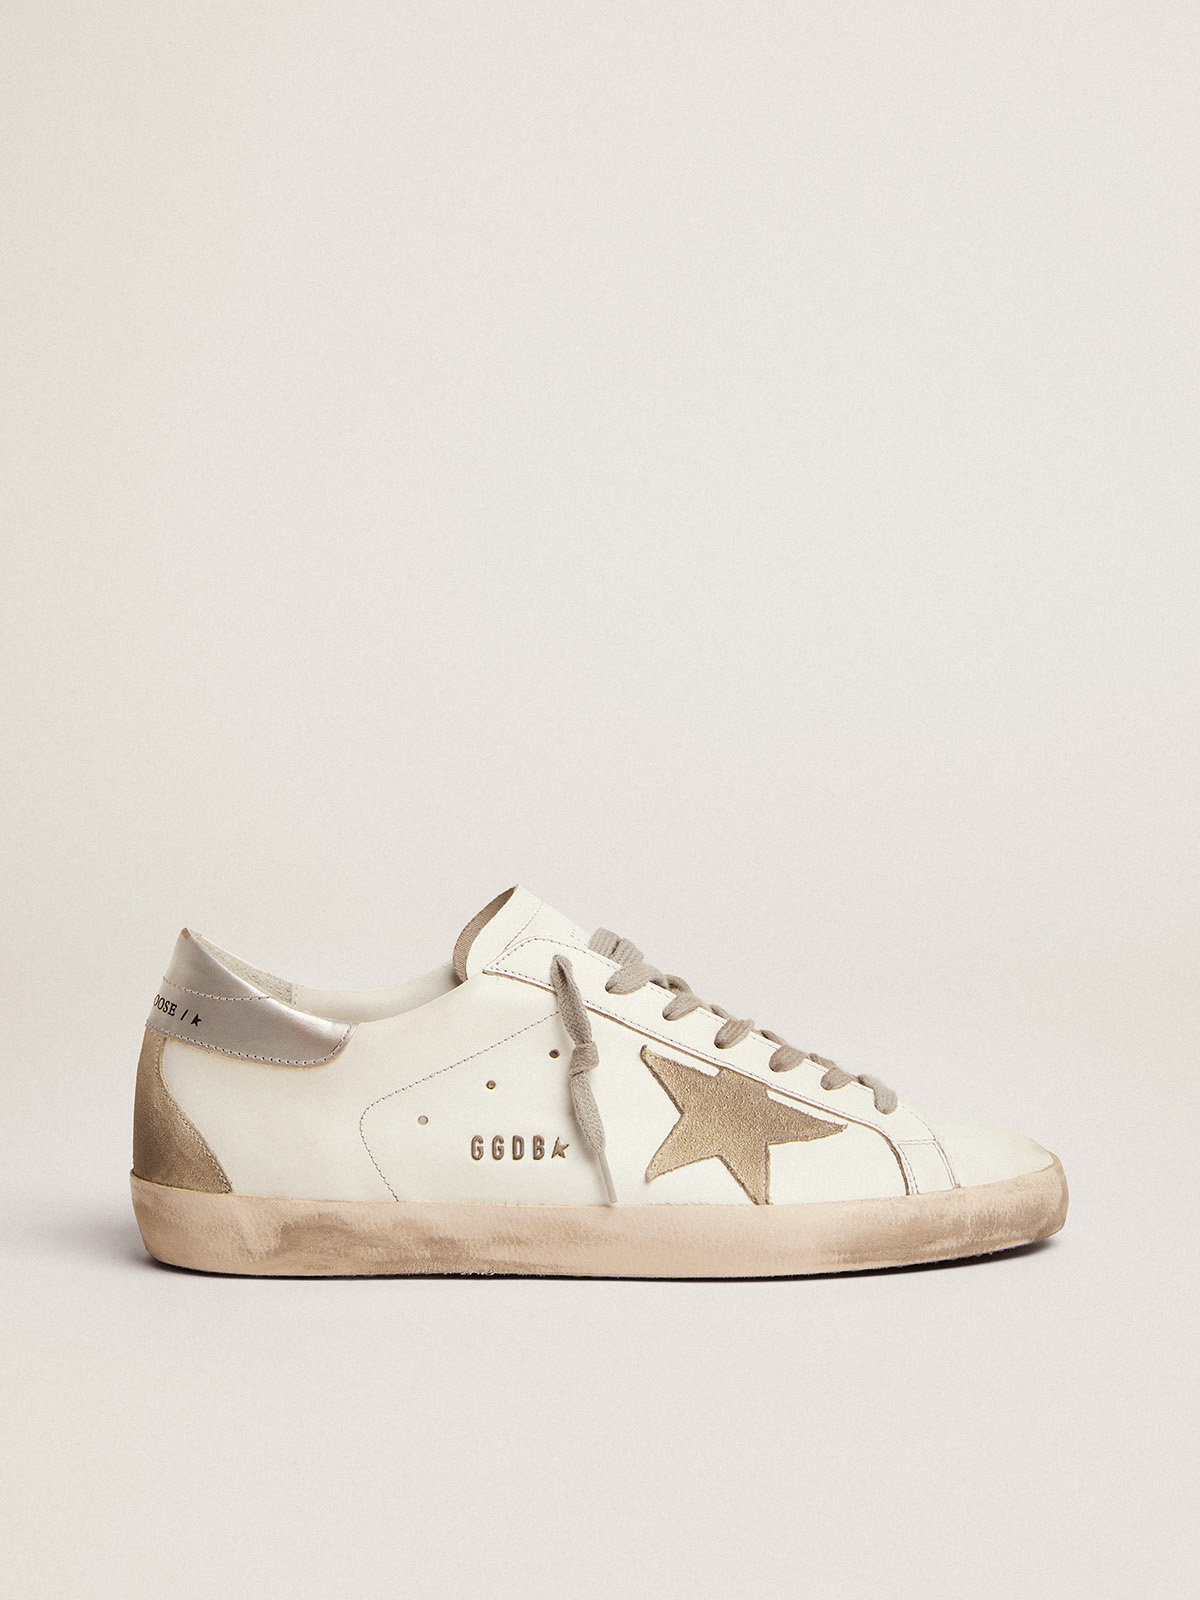 Men's Super-Star with silver heel tab and lettering | Golden Goose